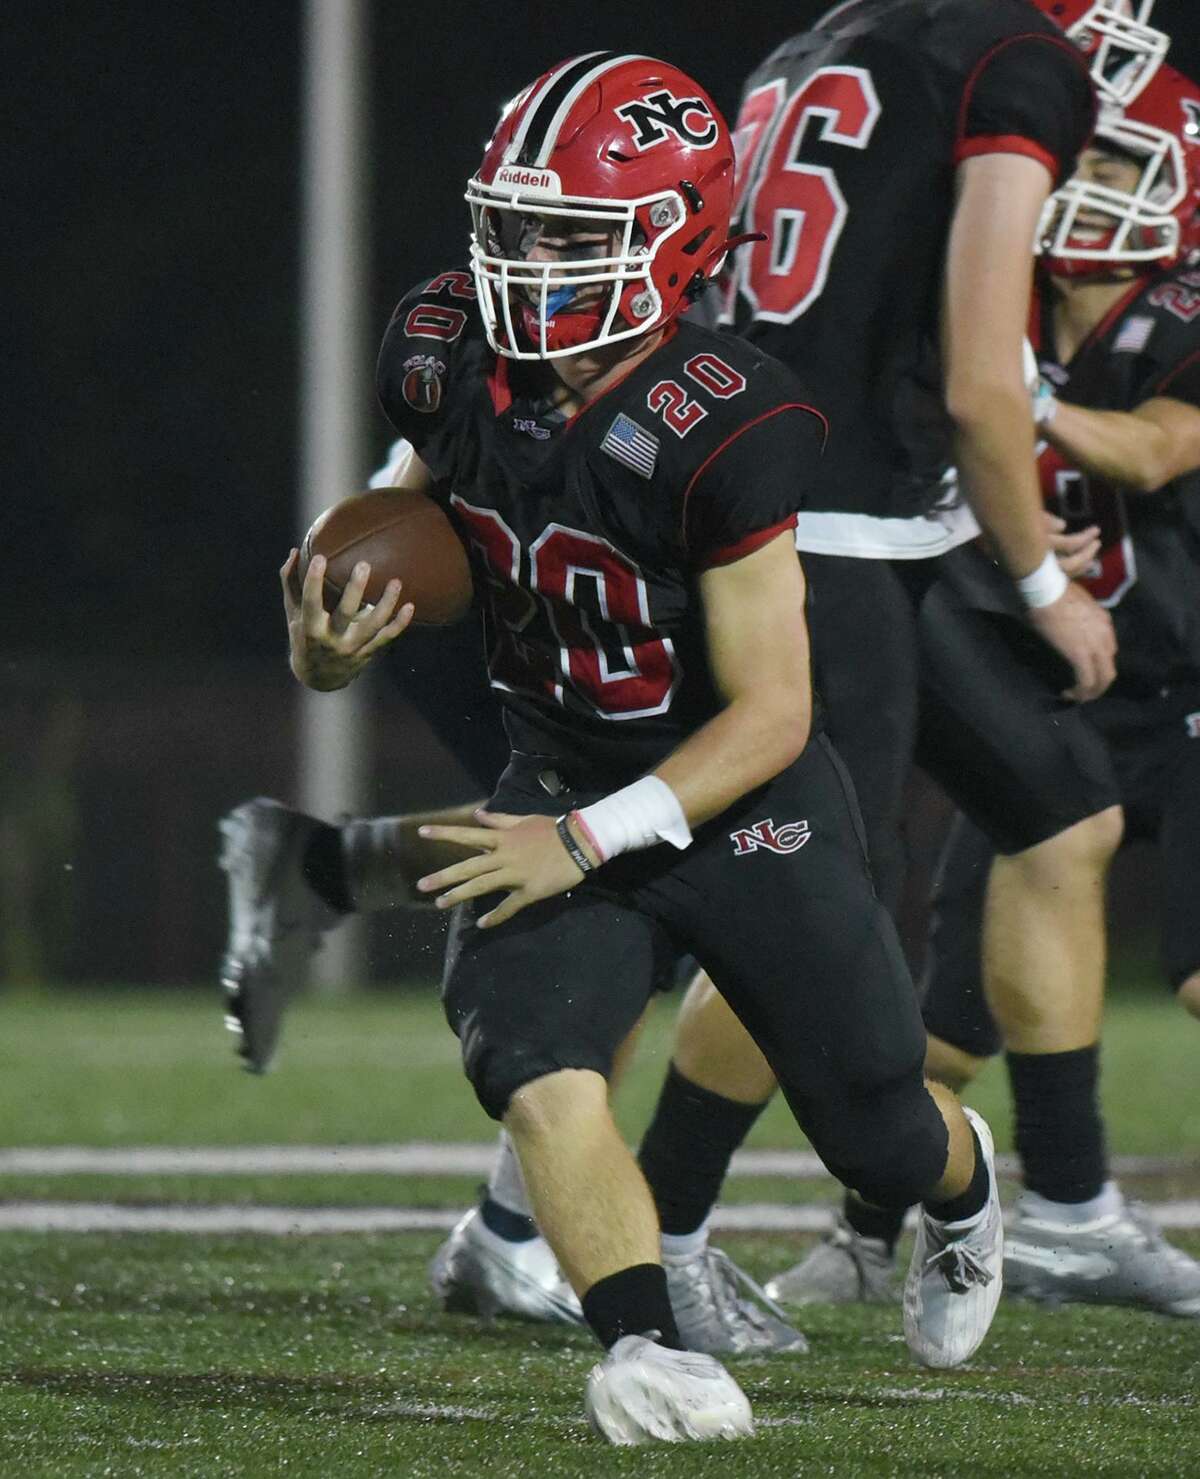 New Canaan’s Conor Bailey (20) runs for a few yards against Brien McMahon during a football game at Dunning Field in New Canaan on Friday, Sept. 17, 2021.